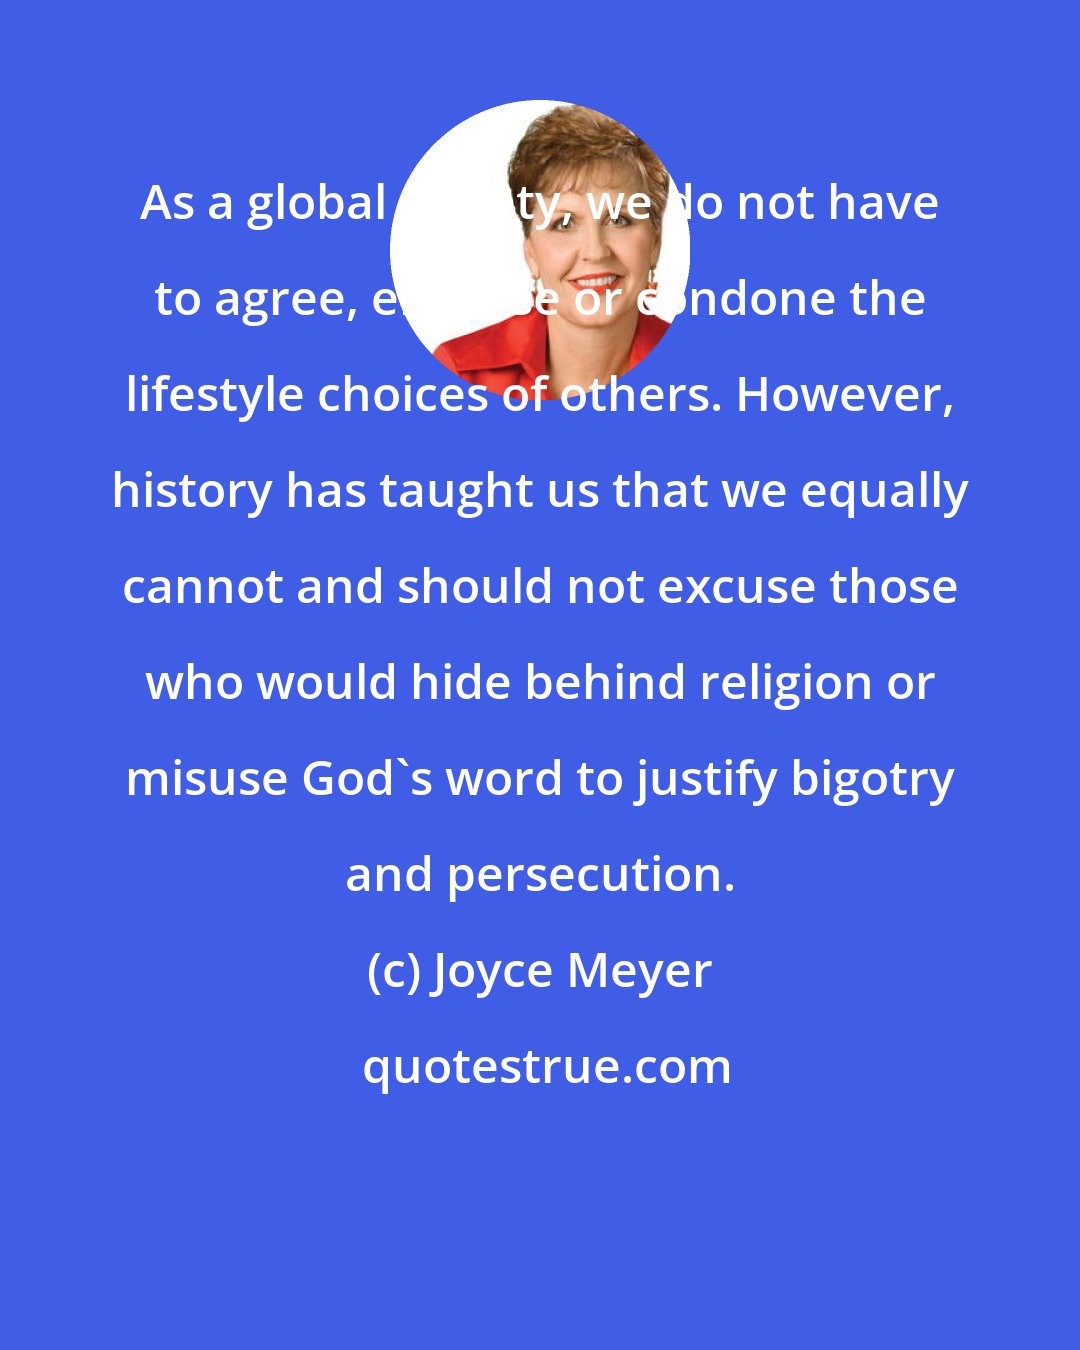 Joyce Meyer: As a global society, we do not have to agree, endorse or condone the lifestyle choices of others. However, history has taught us that we equally cannot and should not excuse those who would hide behind religion or misuse God's word to justify bigotry and persecution.